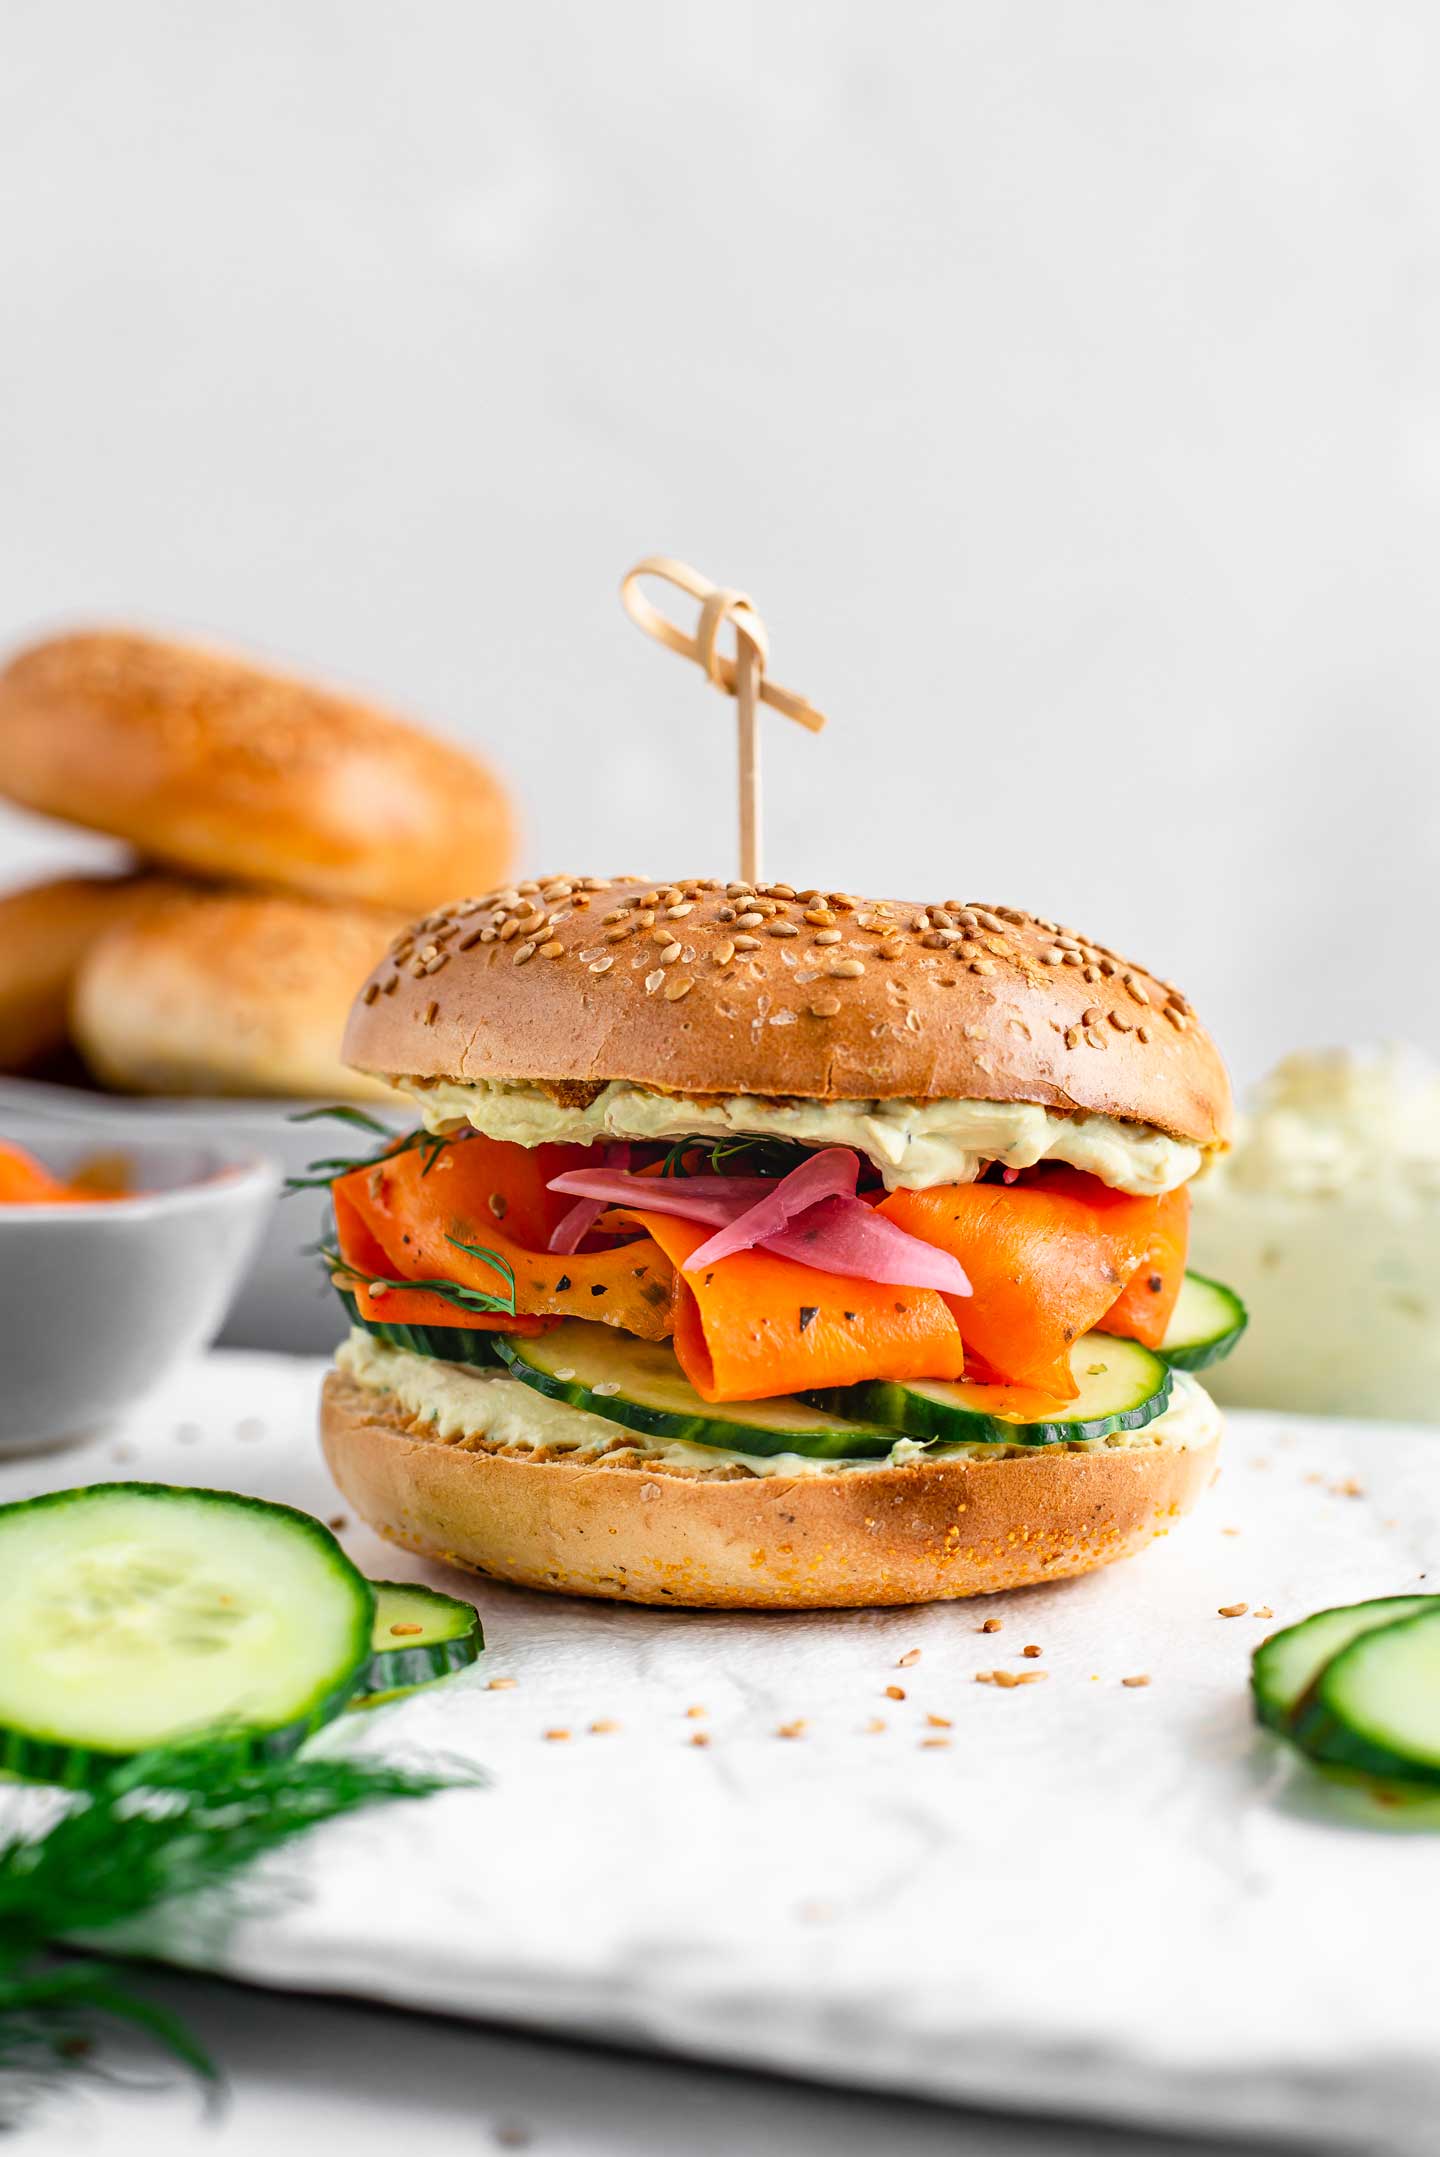 Side view of a loaded vegan carrot lox bagel sandwich. A toasted bagel stuffed with creamy dill spread, cucumber slices, smoky lox, dill and pickled red onion.